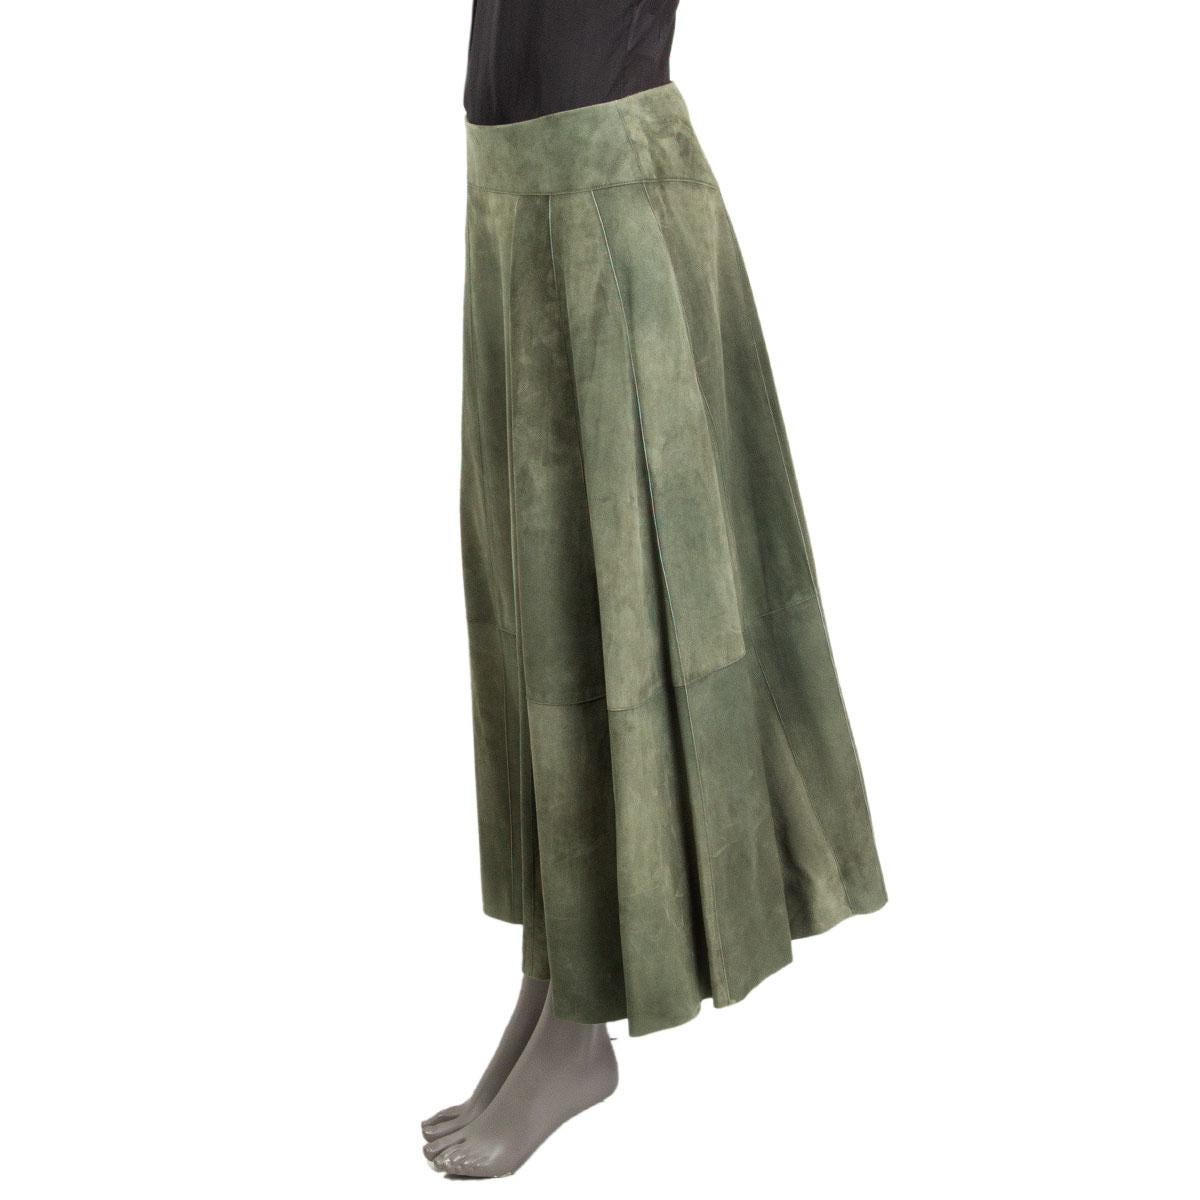 olive green suede skirt